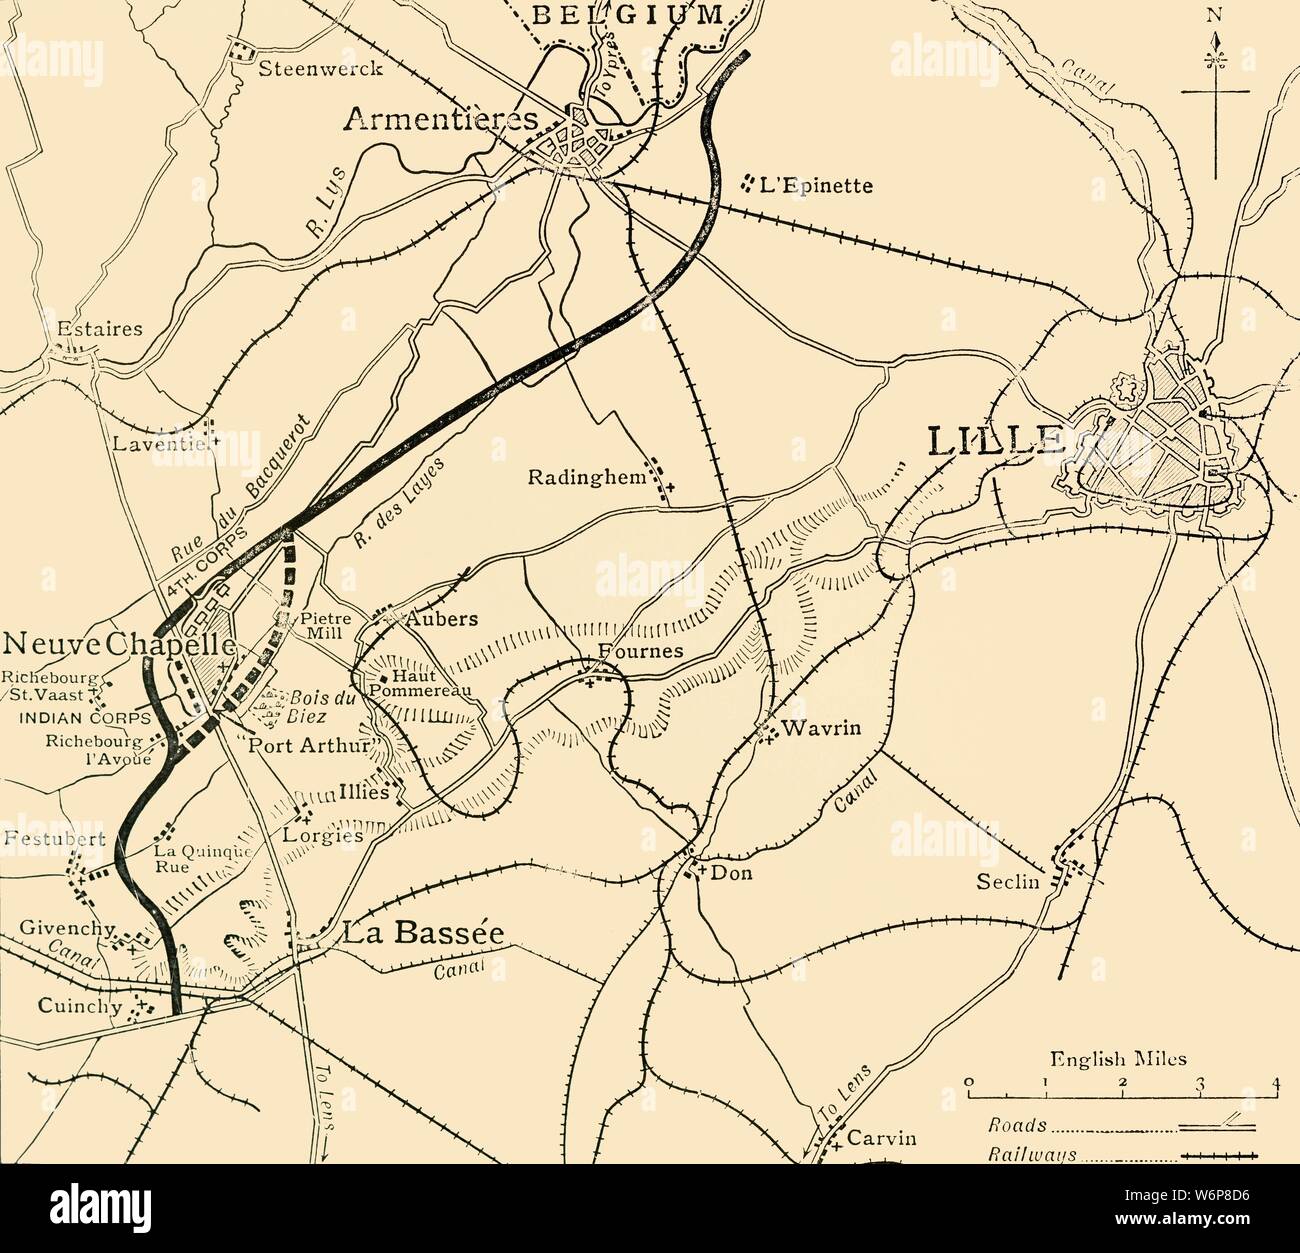 'The Battleground of Neuve Chapelle', First World War, 1915, (c1920). 'Map showing the British positions on the eve of the attack, and the British line before and after the fighting of March 10-14, 1915'. The landscape of the village of Neuve-Chapelle and surrounding countryside in northern France. The battle marked a watershed in trench warfare. From &quot;The Great World War - A History&quot; Volume III, edited by Frank A Mumby. [The Gresham Publishing Company Ltd, London, c1920] Stock Photo